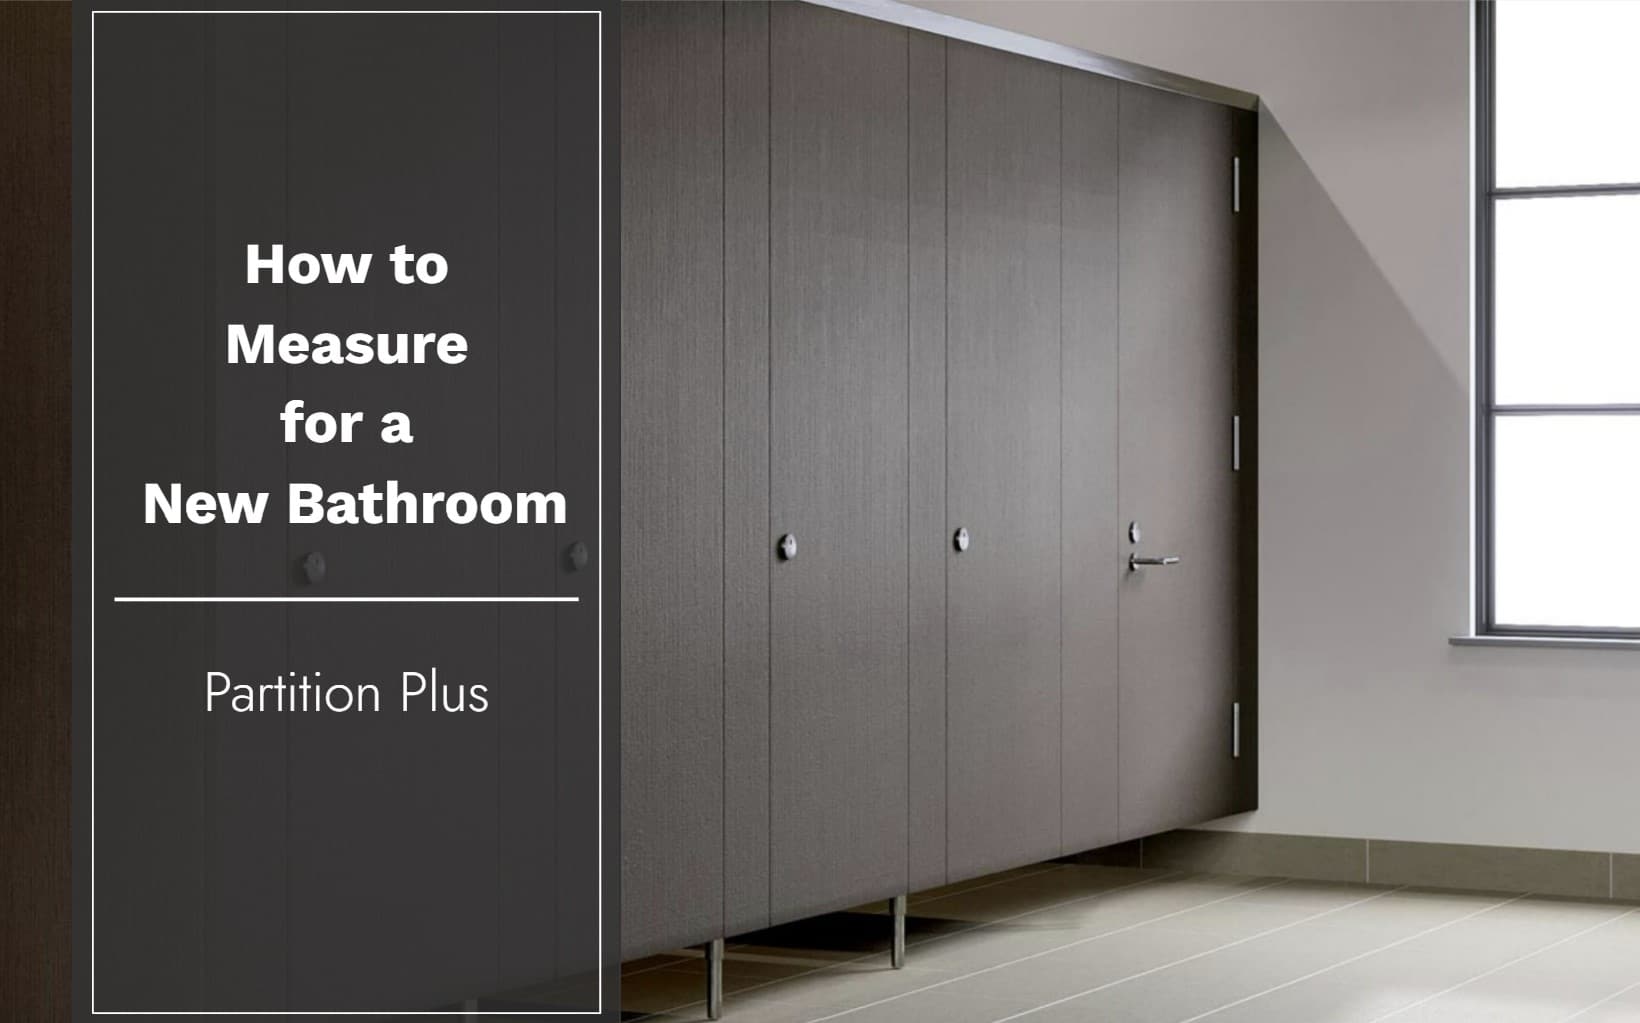 How to Measure Dimensions for a New Bathroom